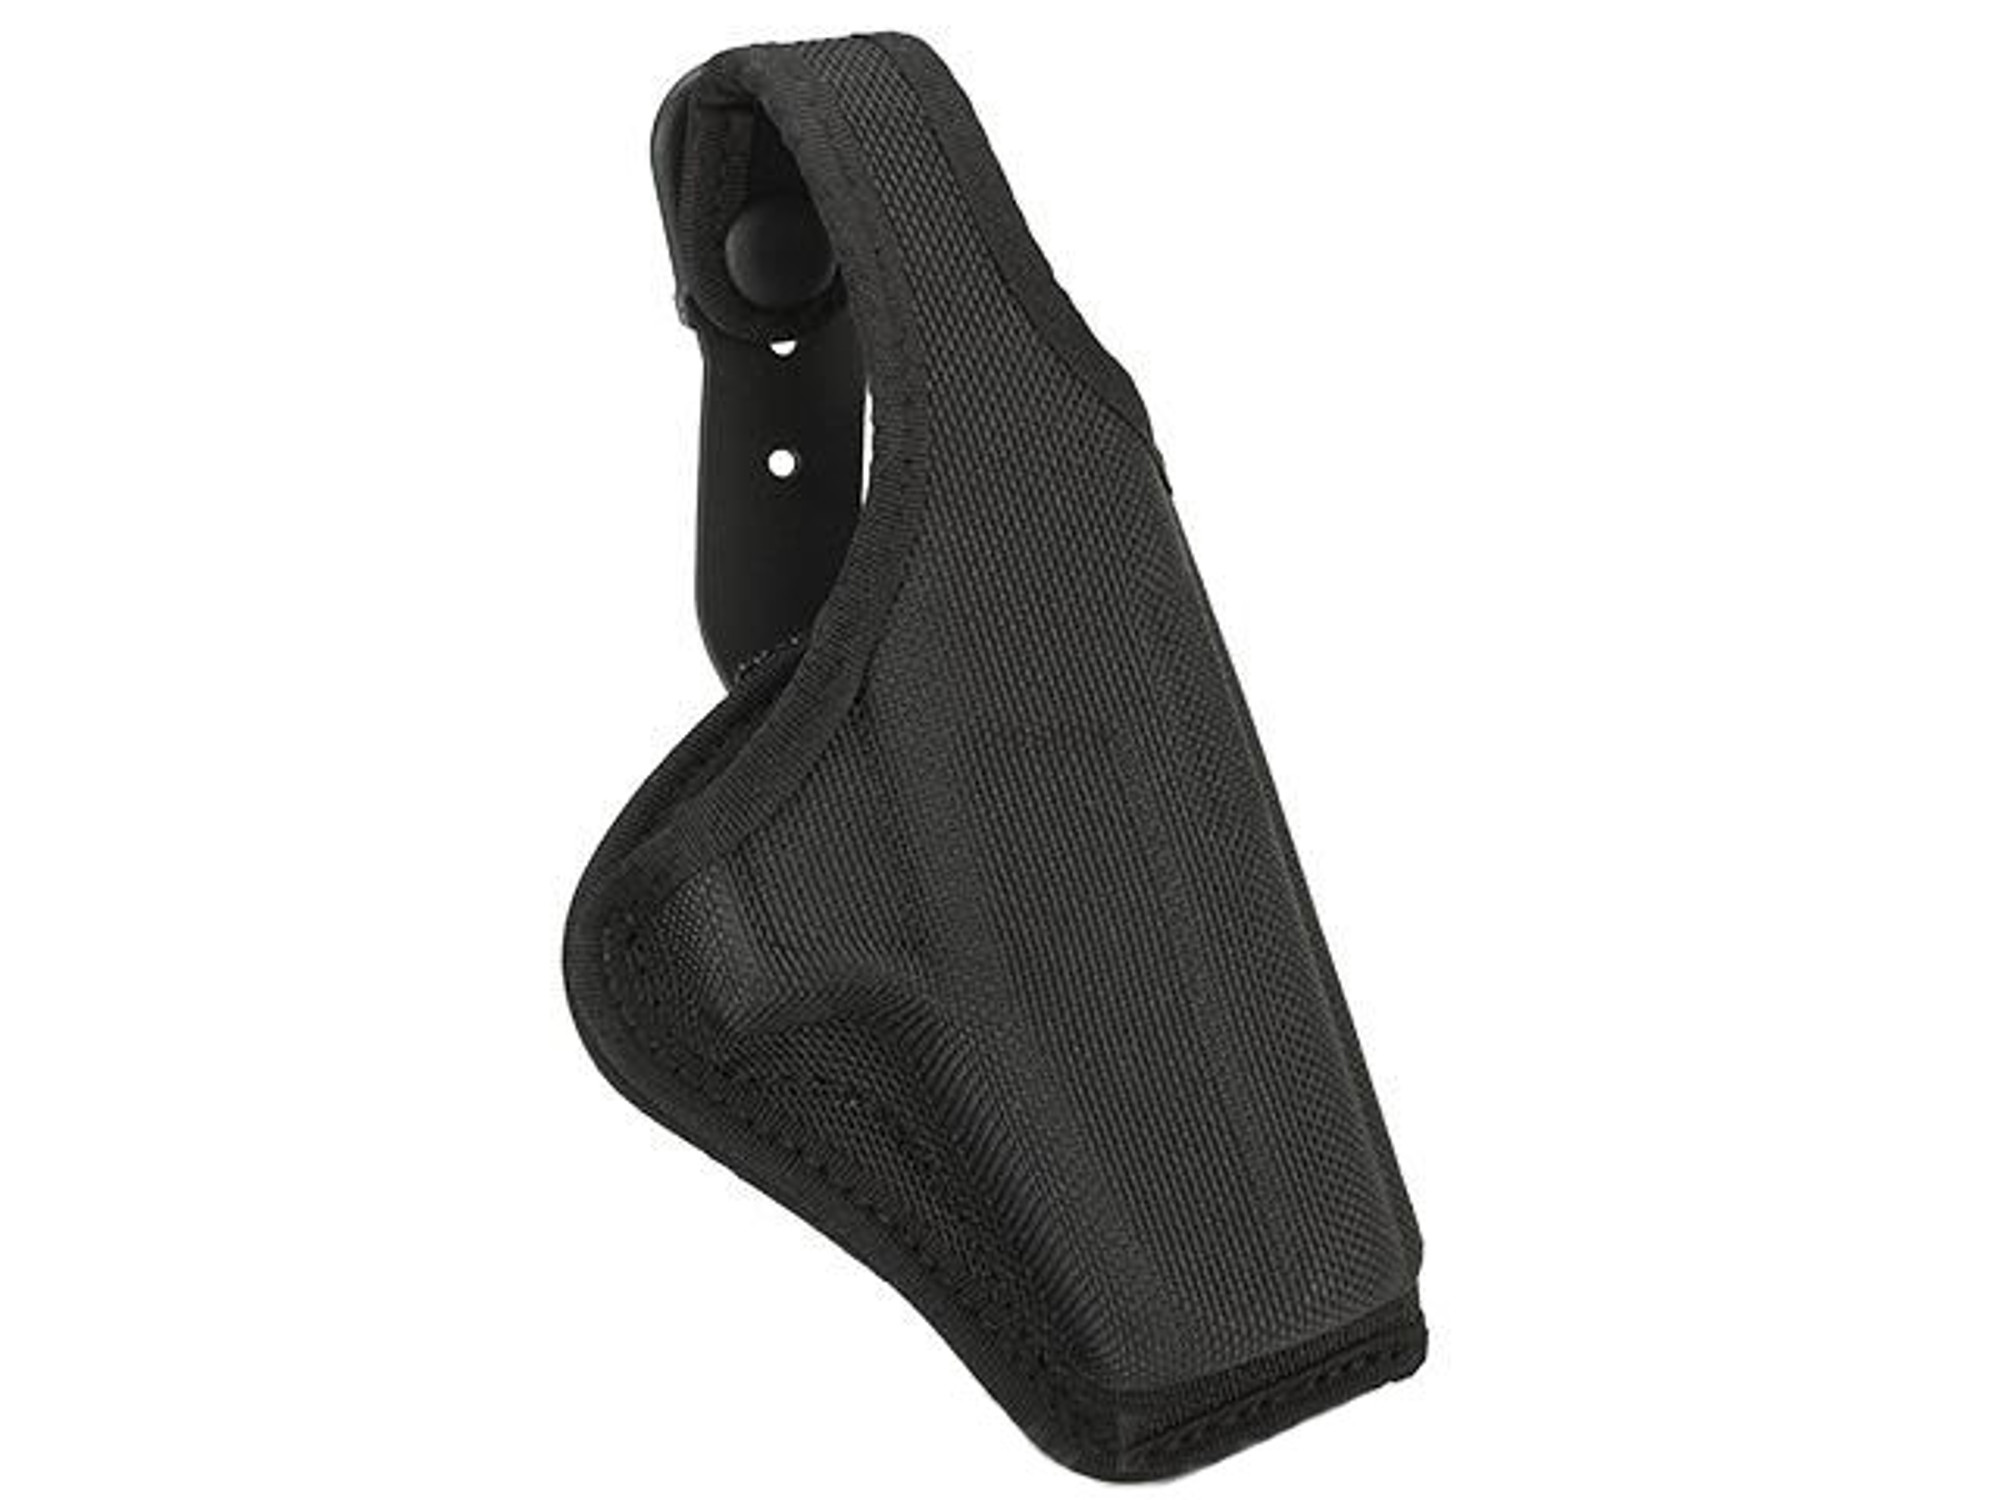 SAFARILAND / BIANCHI AccuMold Belt Clip Holster with Thumbsnap for Glock 19 23 USP Compact XD (Right)